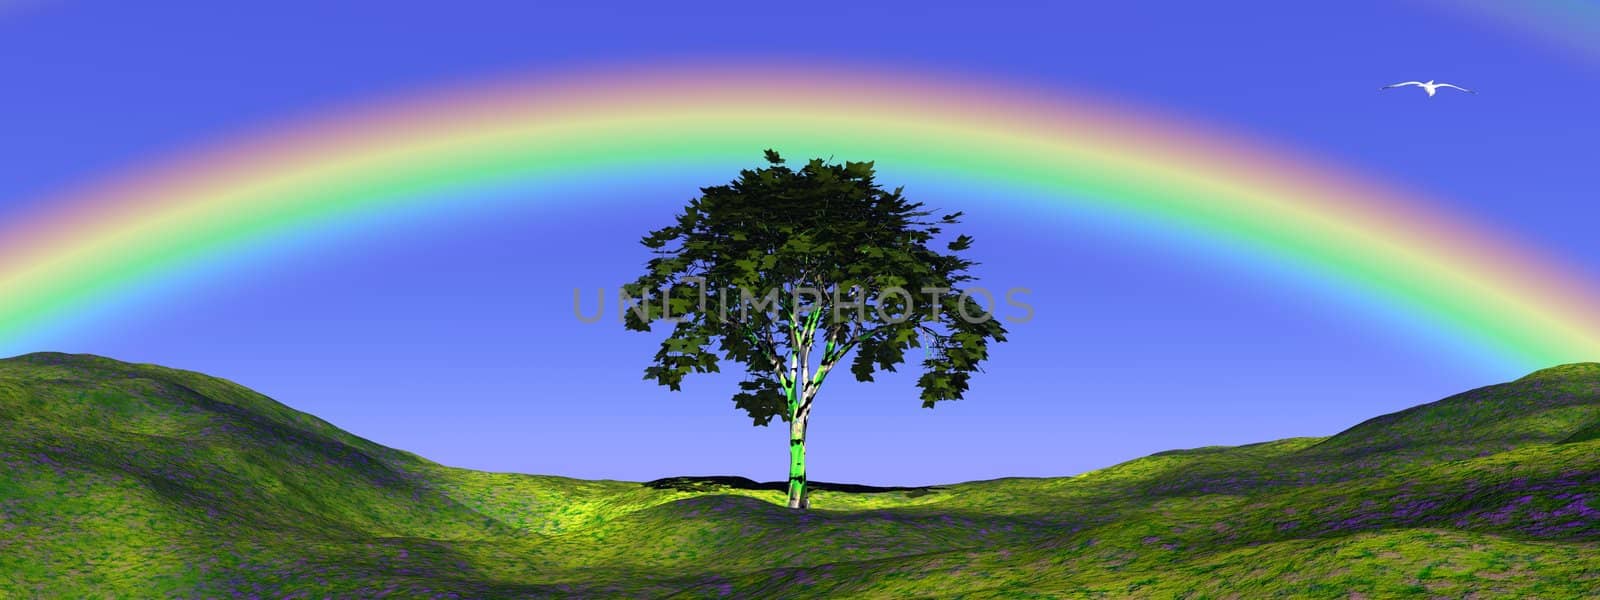 Summer tree on a green grass hill and under a beautiful rainbow